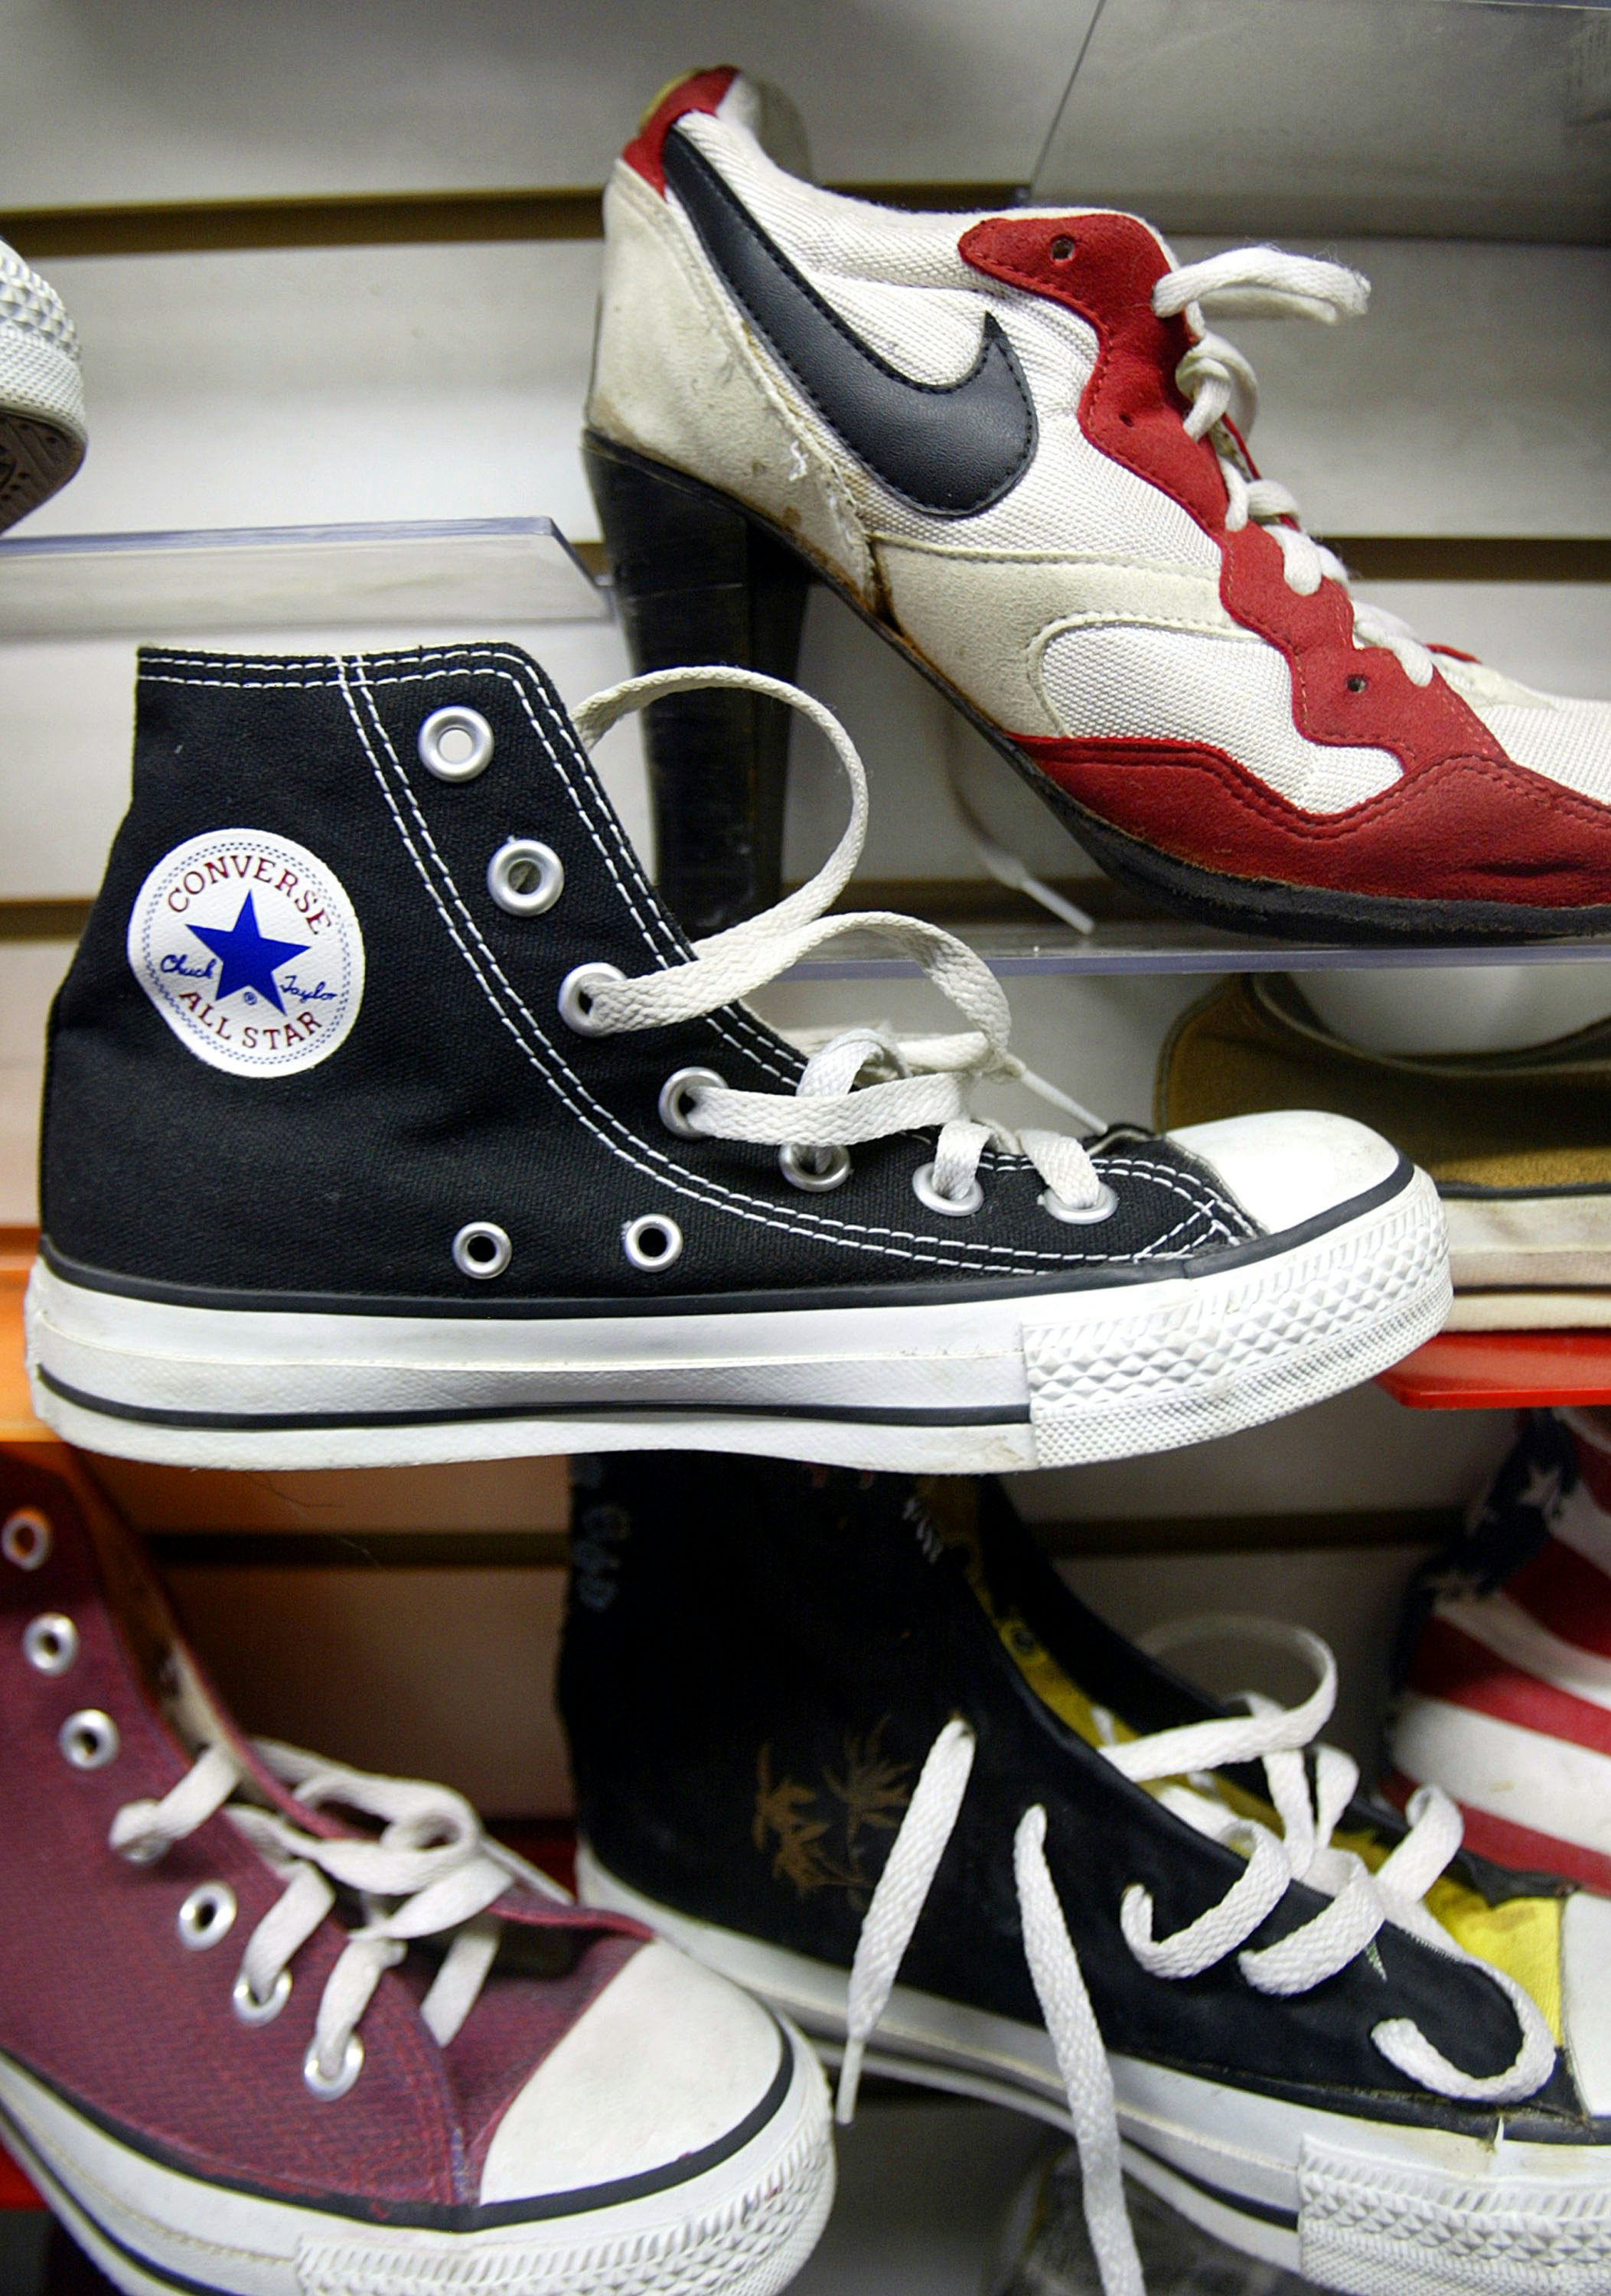 converse shoes in walmart